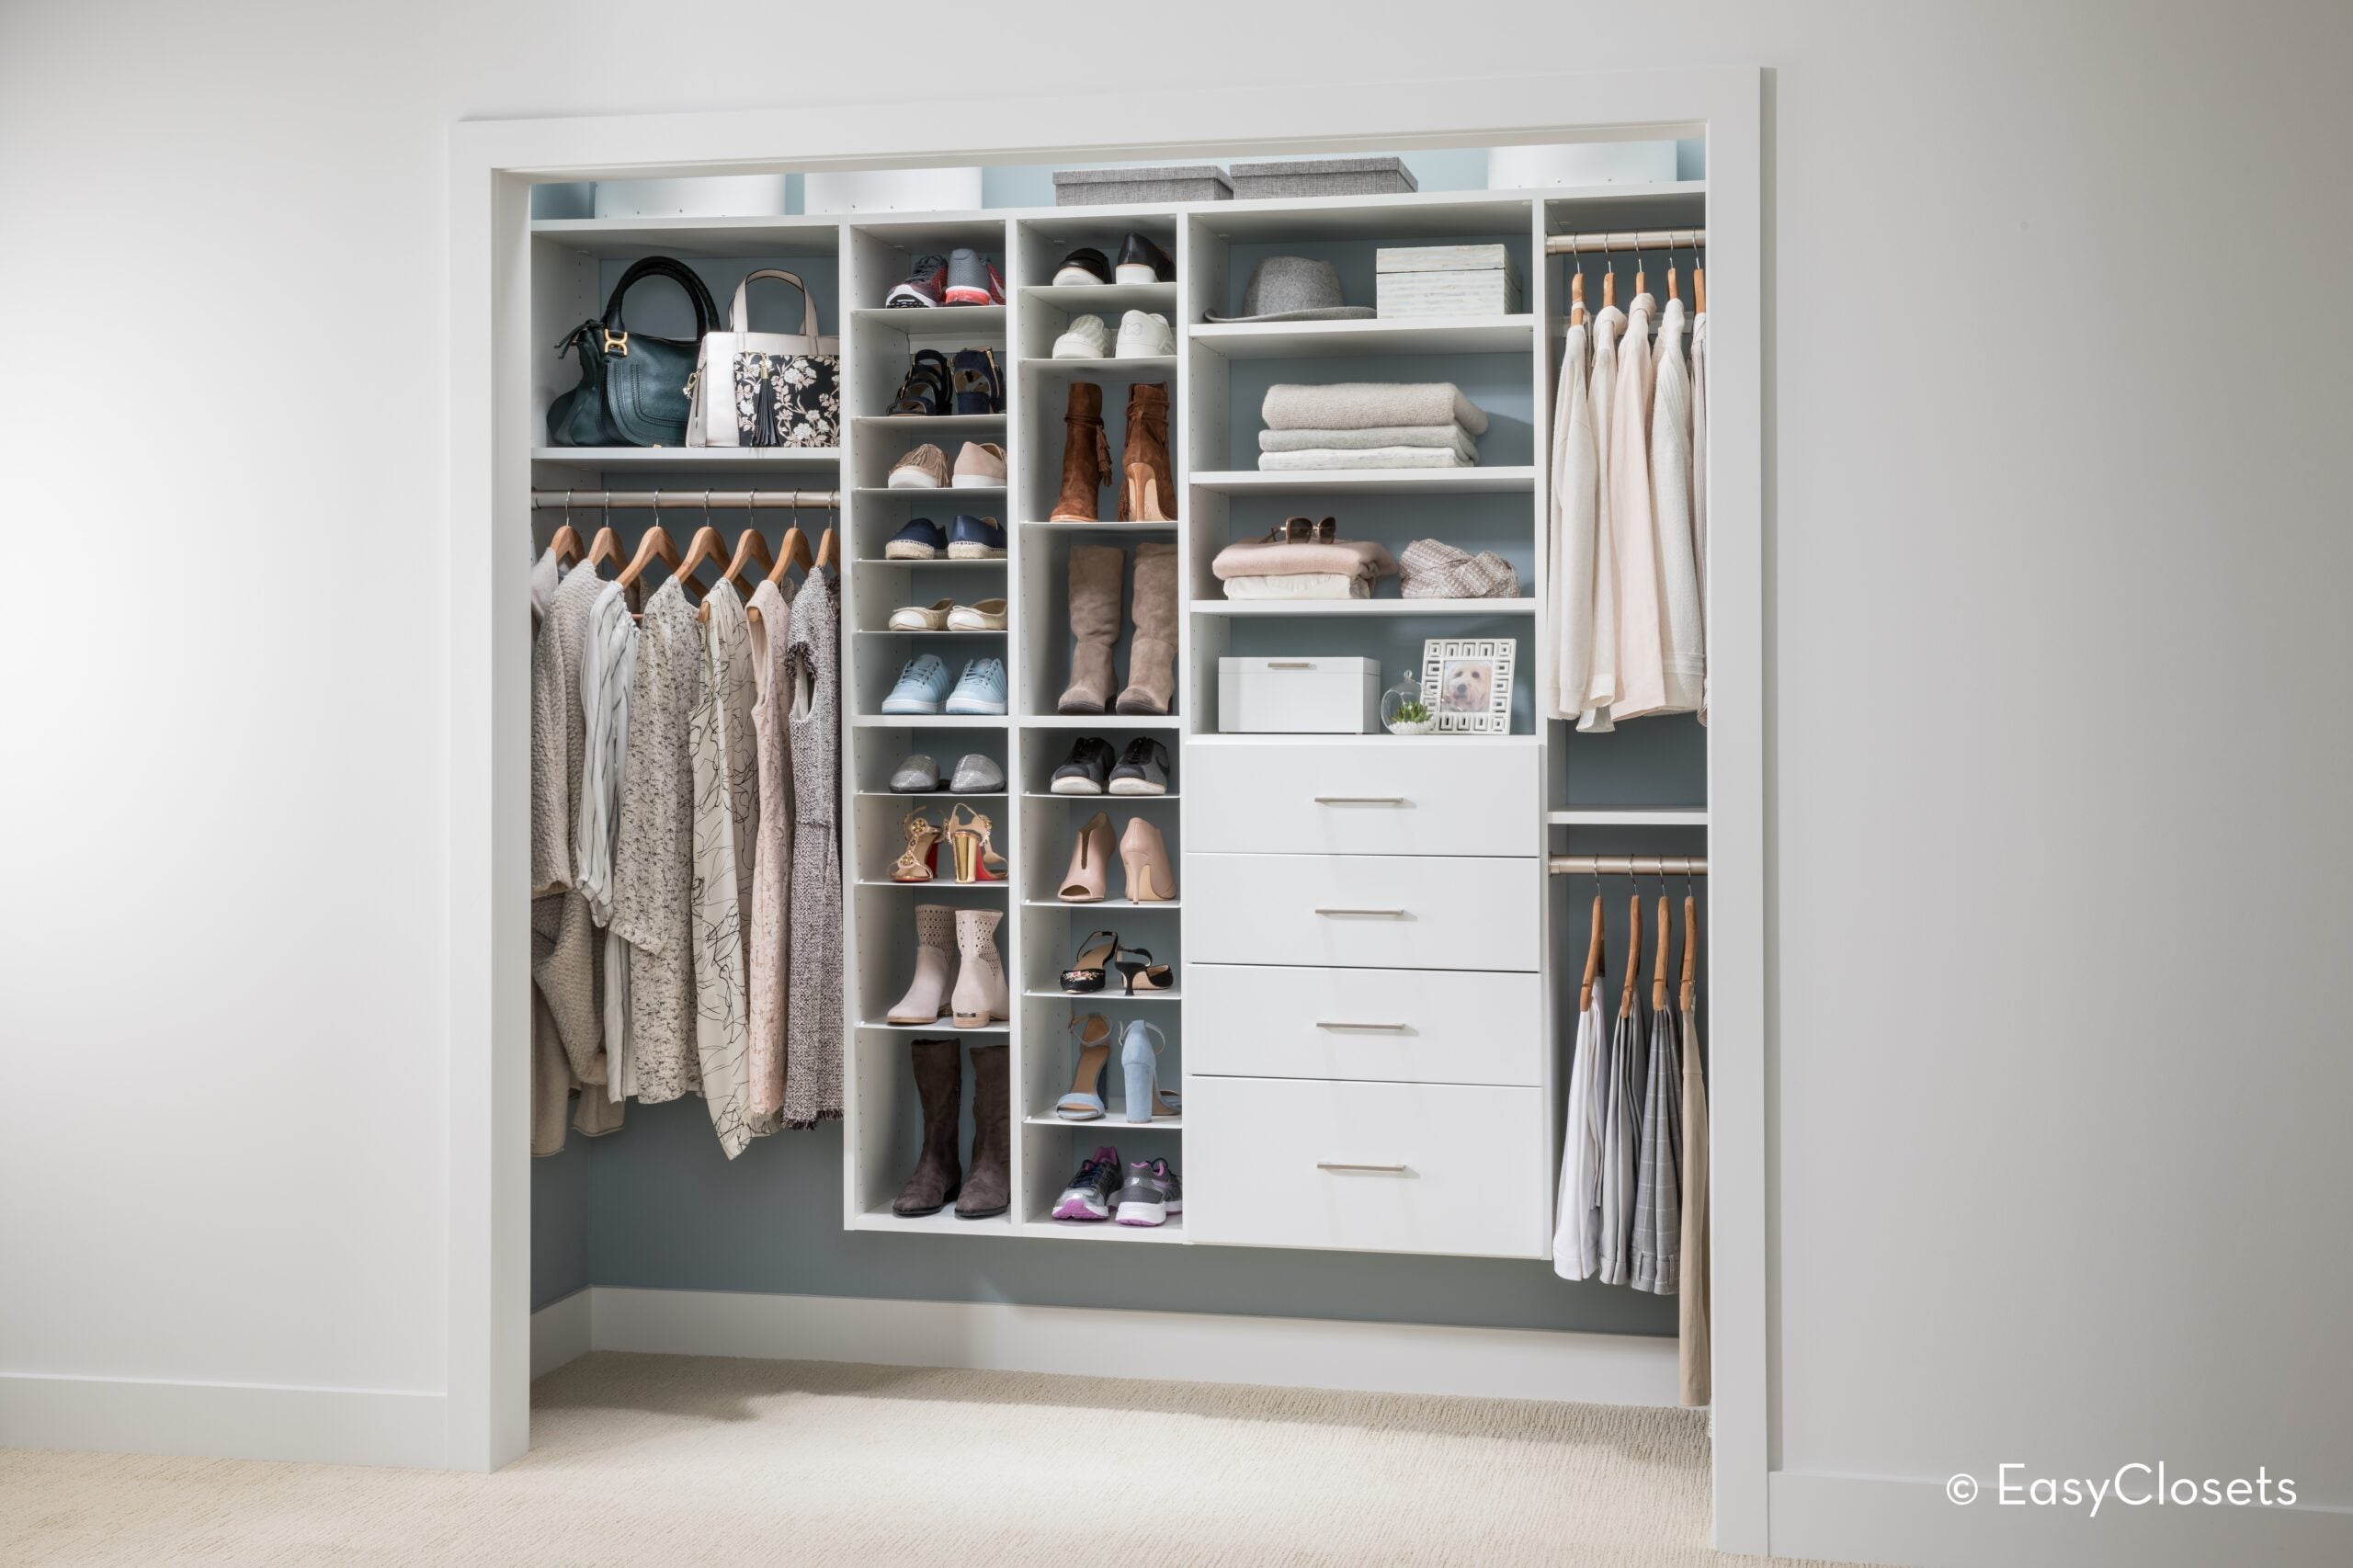 https://bdc2020.o0bc.com/wp-content/uploads/2018/04/easy-closets-staged-1-630a0d9f89842-scaled.jpg